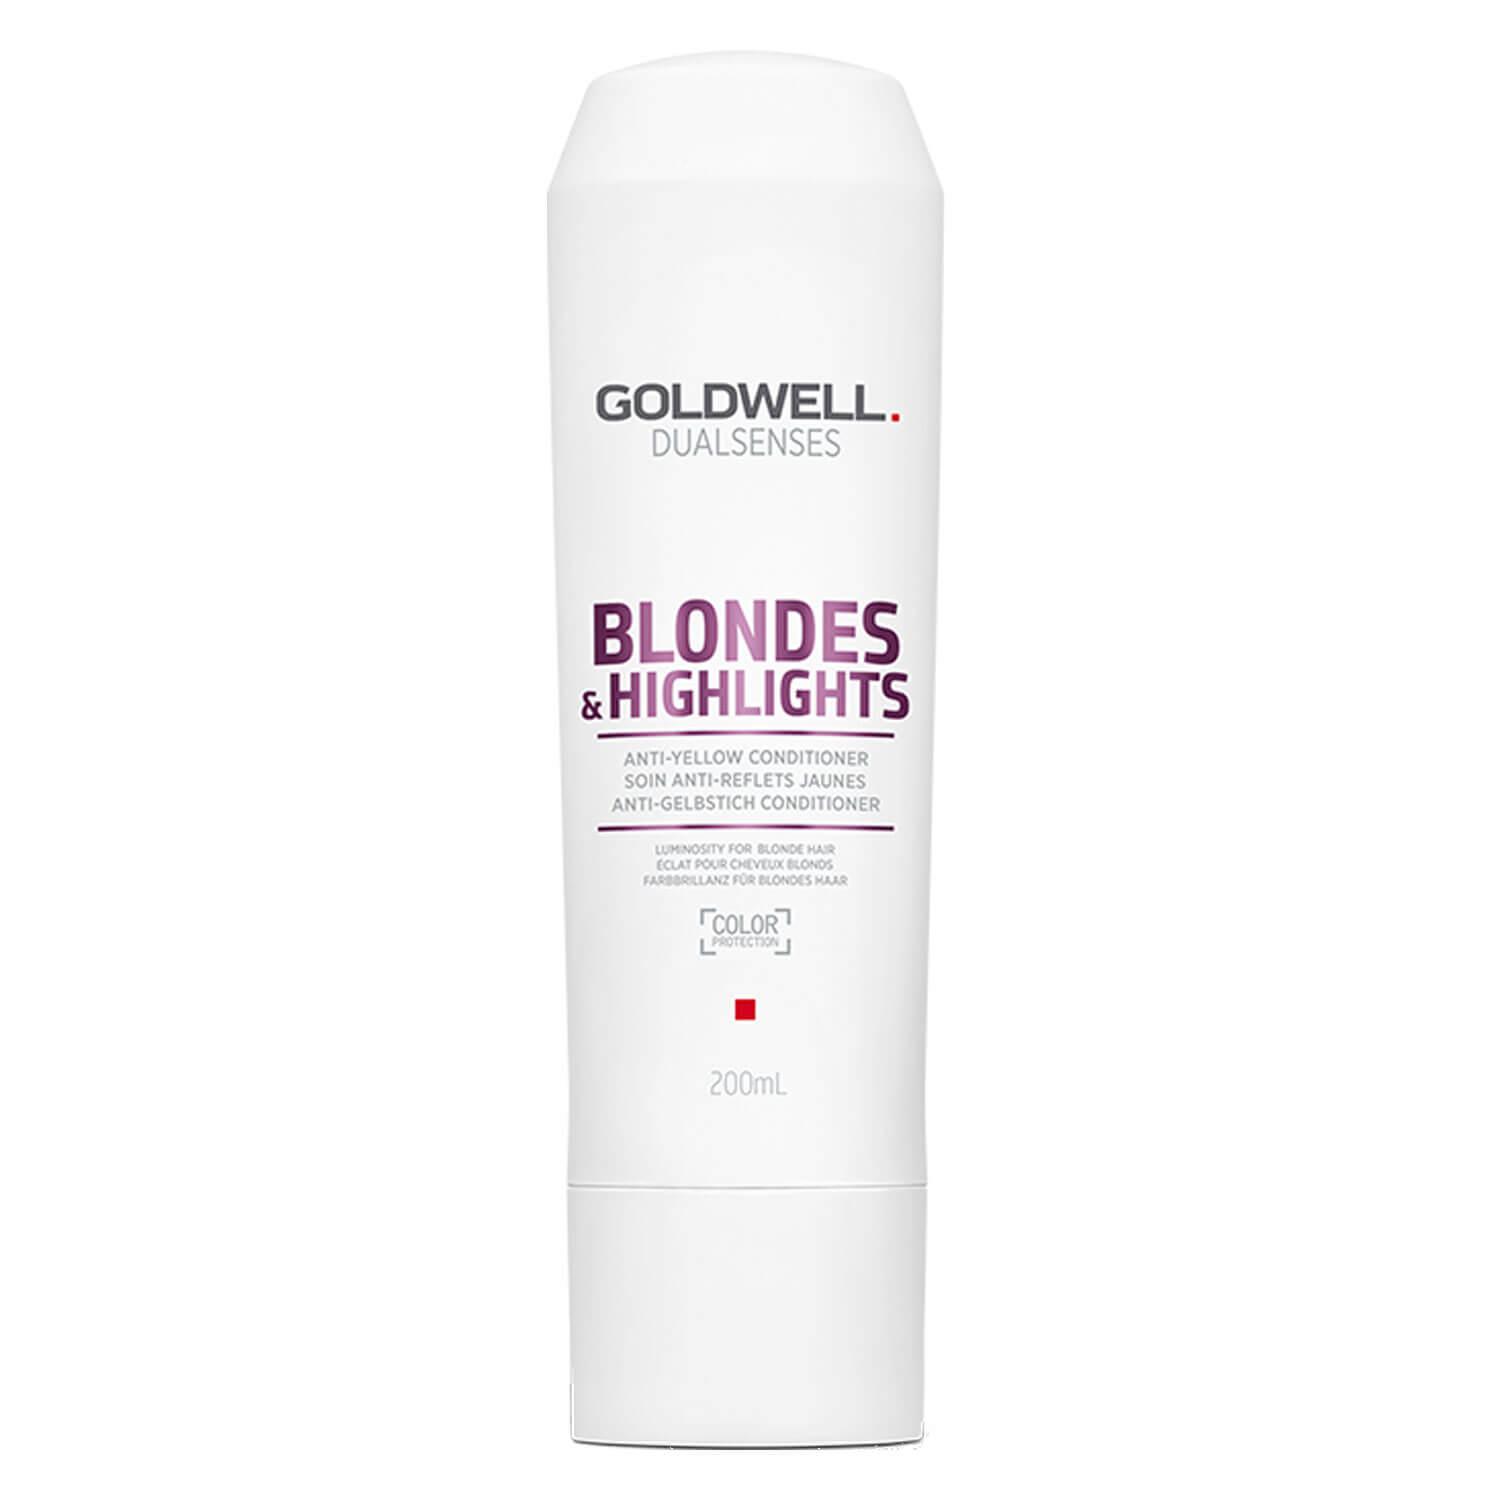 Dualsenses Blondes & Highlights - Anti-Yellow Conditioner